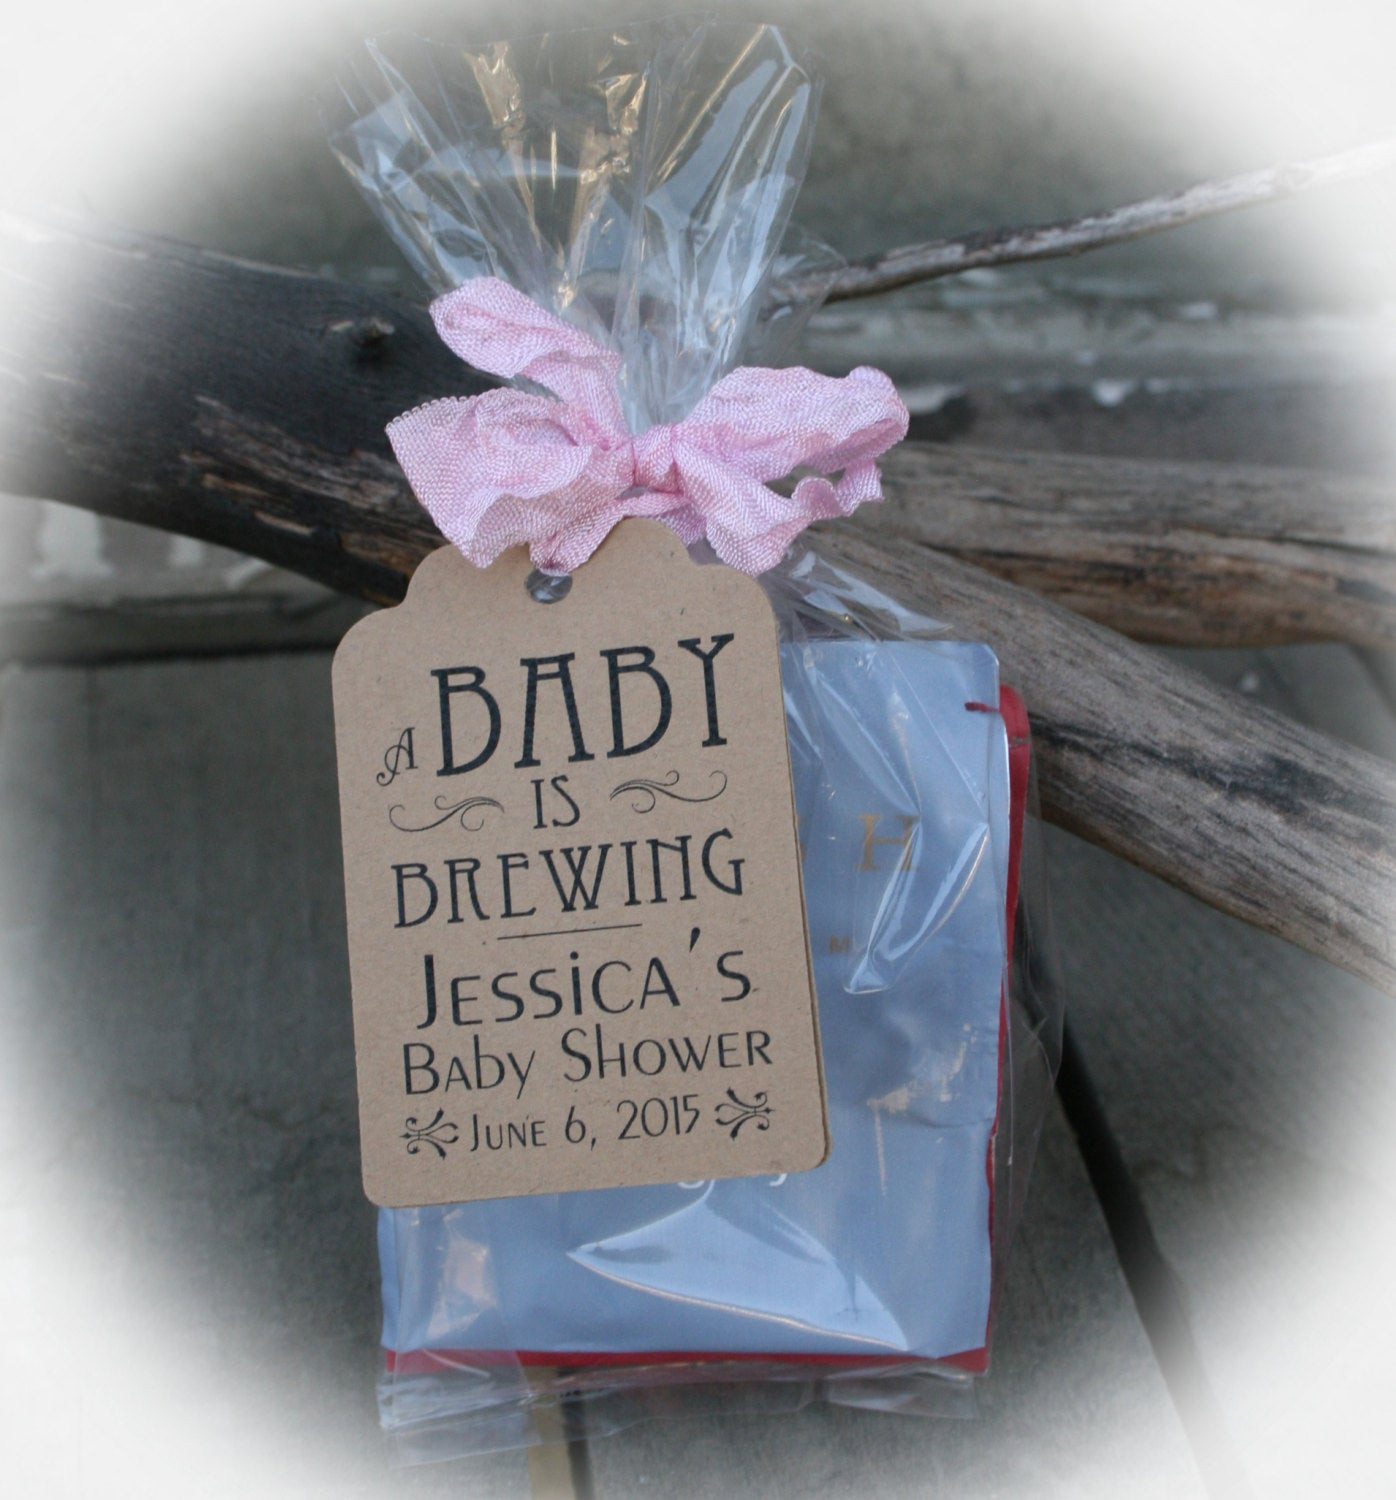 Baby Shower Favours DIY
 A BABY is Brewing Baby Shower Favors DIY Bags Favor Tags